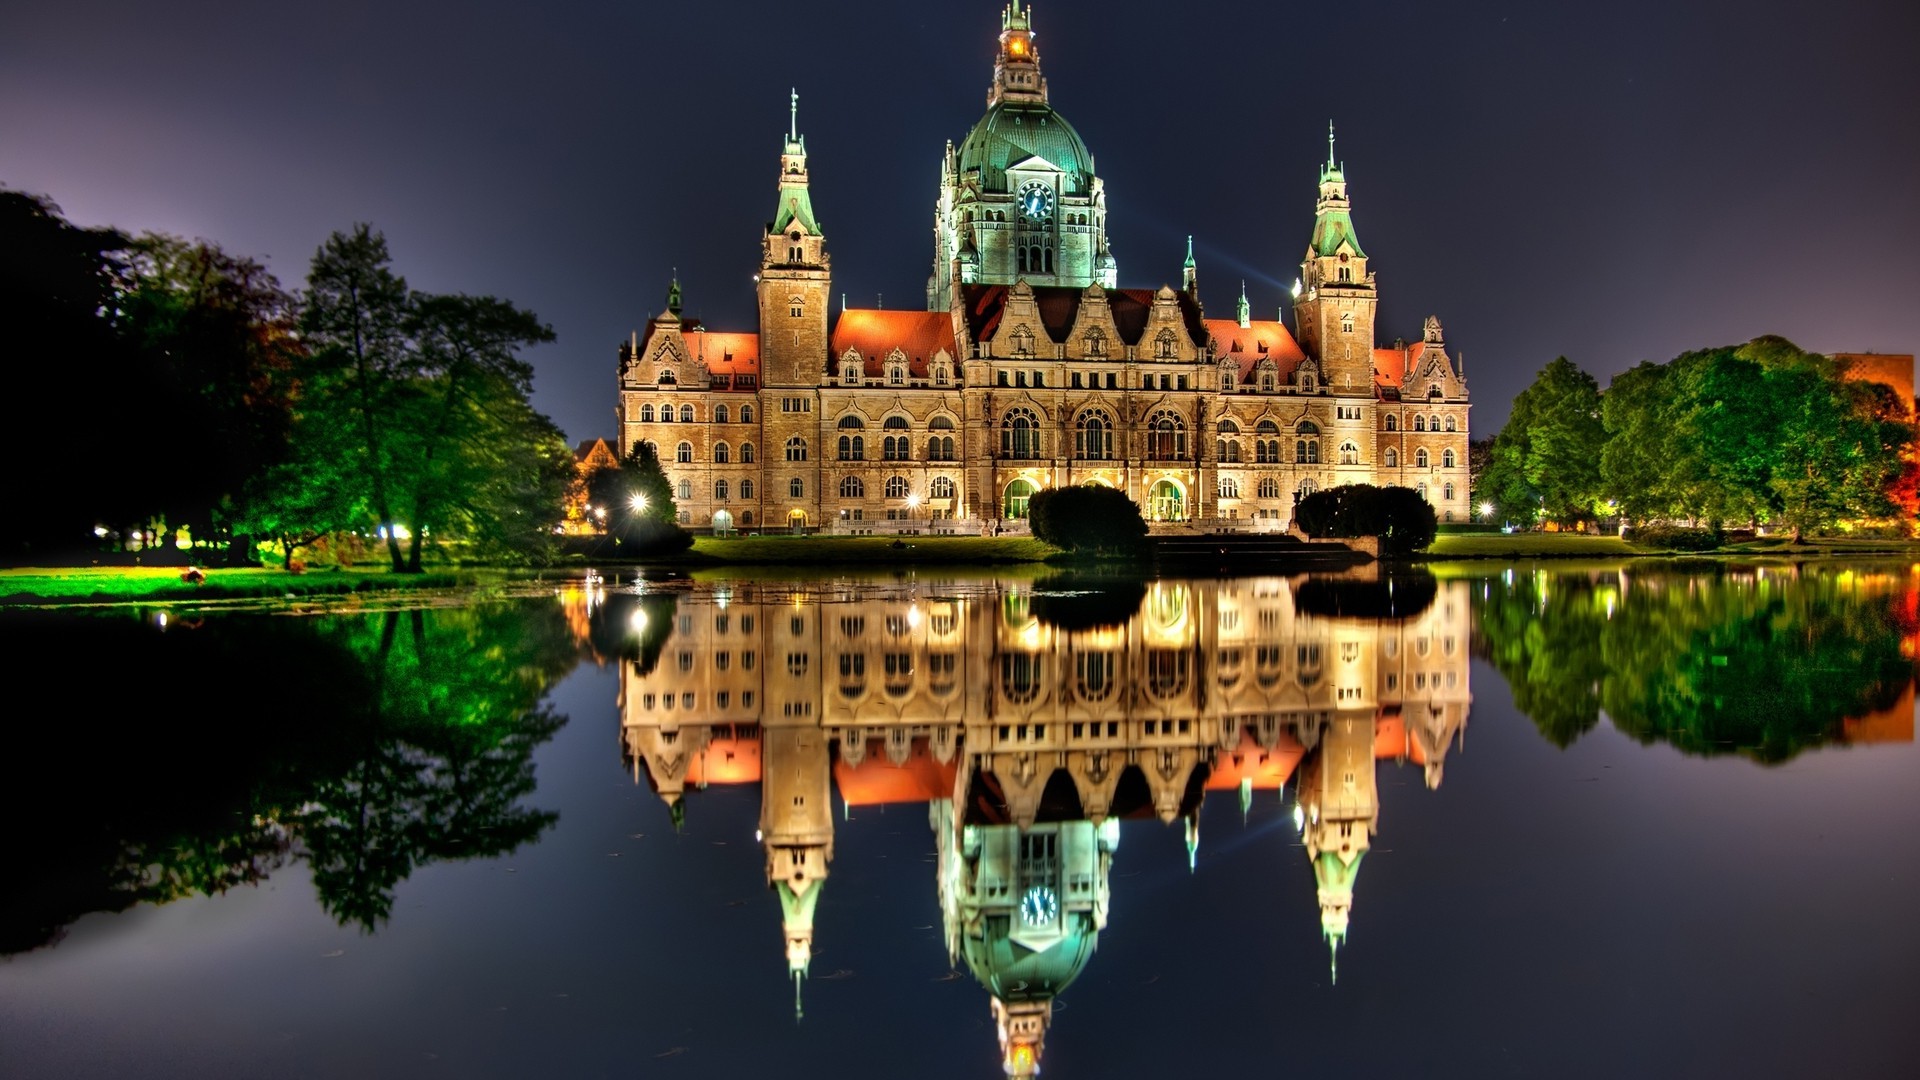 architecture, City, Cityscape, Germany, Water, Old Building, Night, Lights, Sky, Castle, Lake, Trees, Reflection, Mirrored, Clock Towers, Hanover, City Hall, Landscape Wallpaper